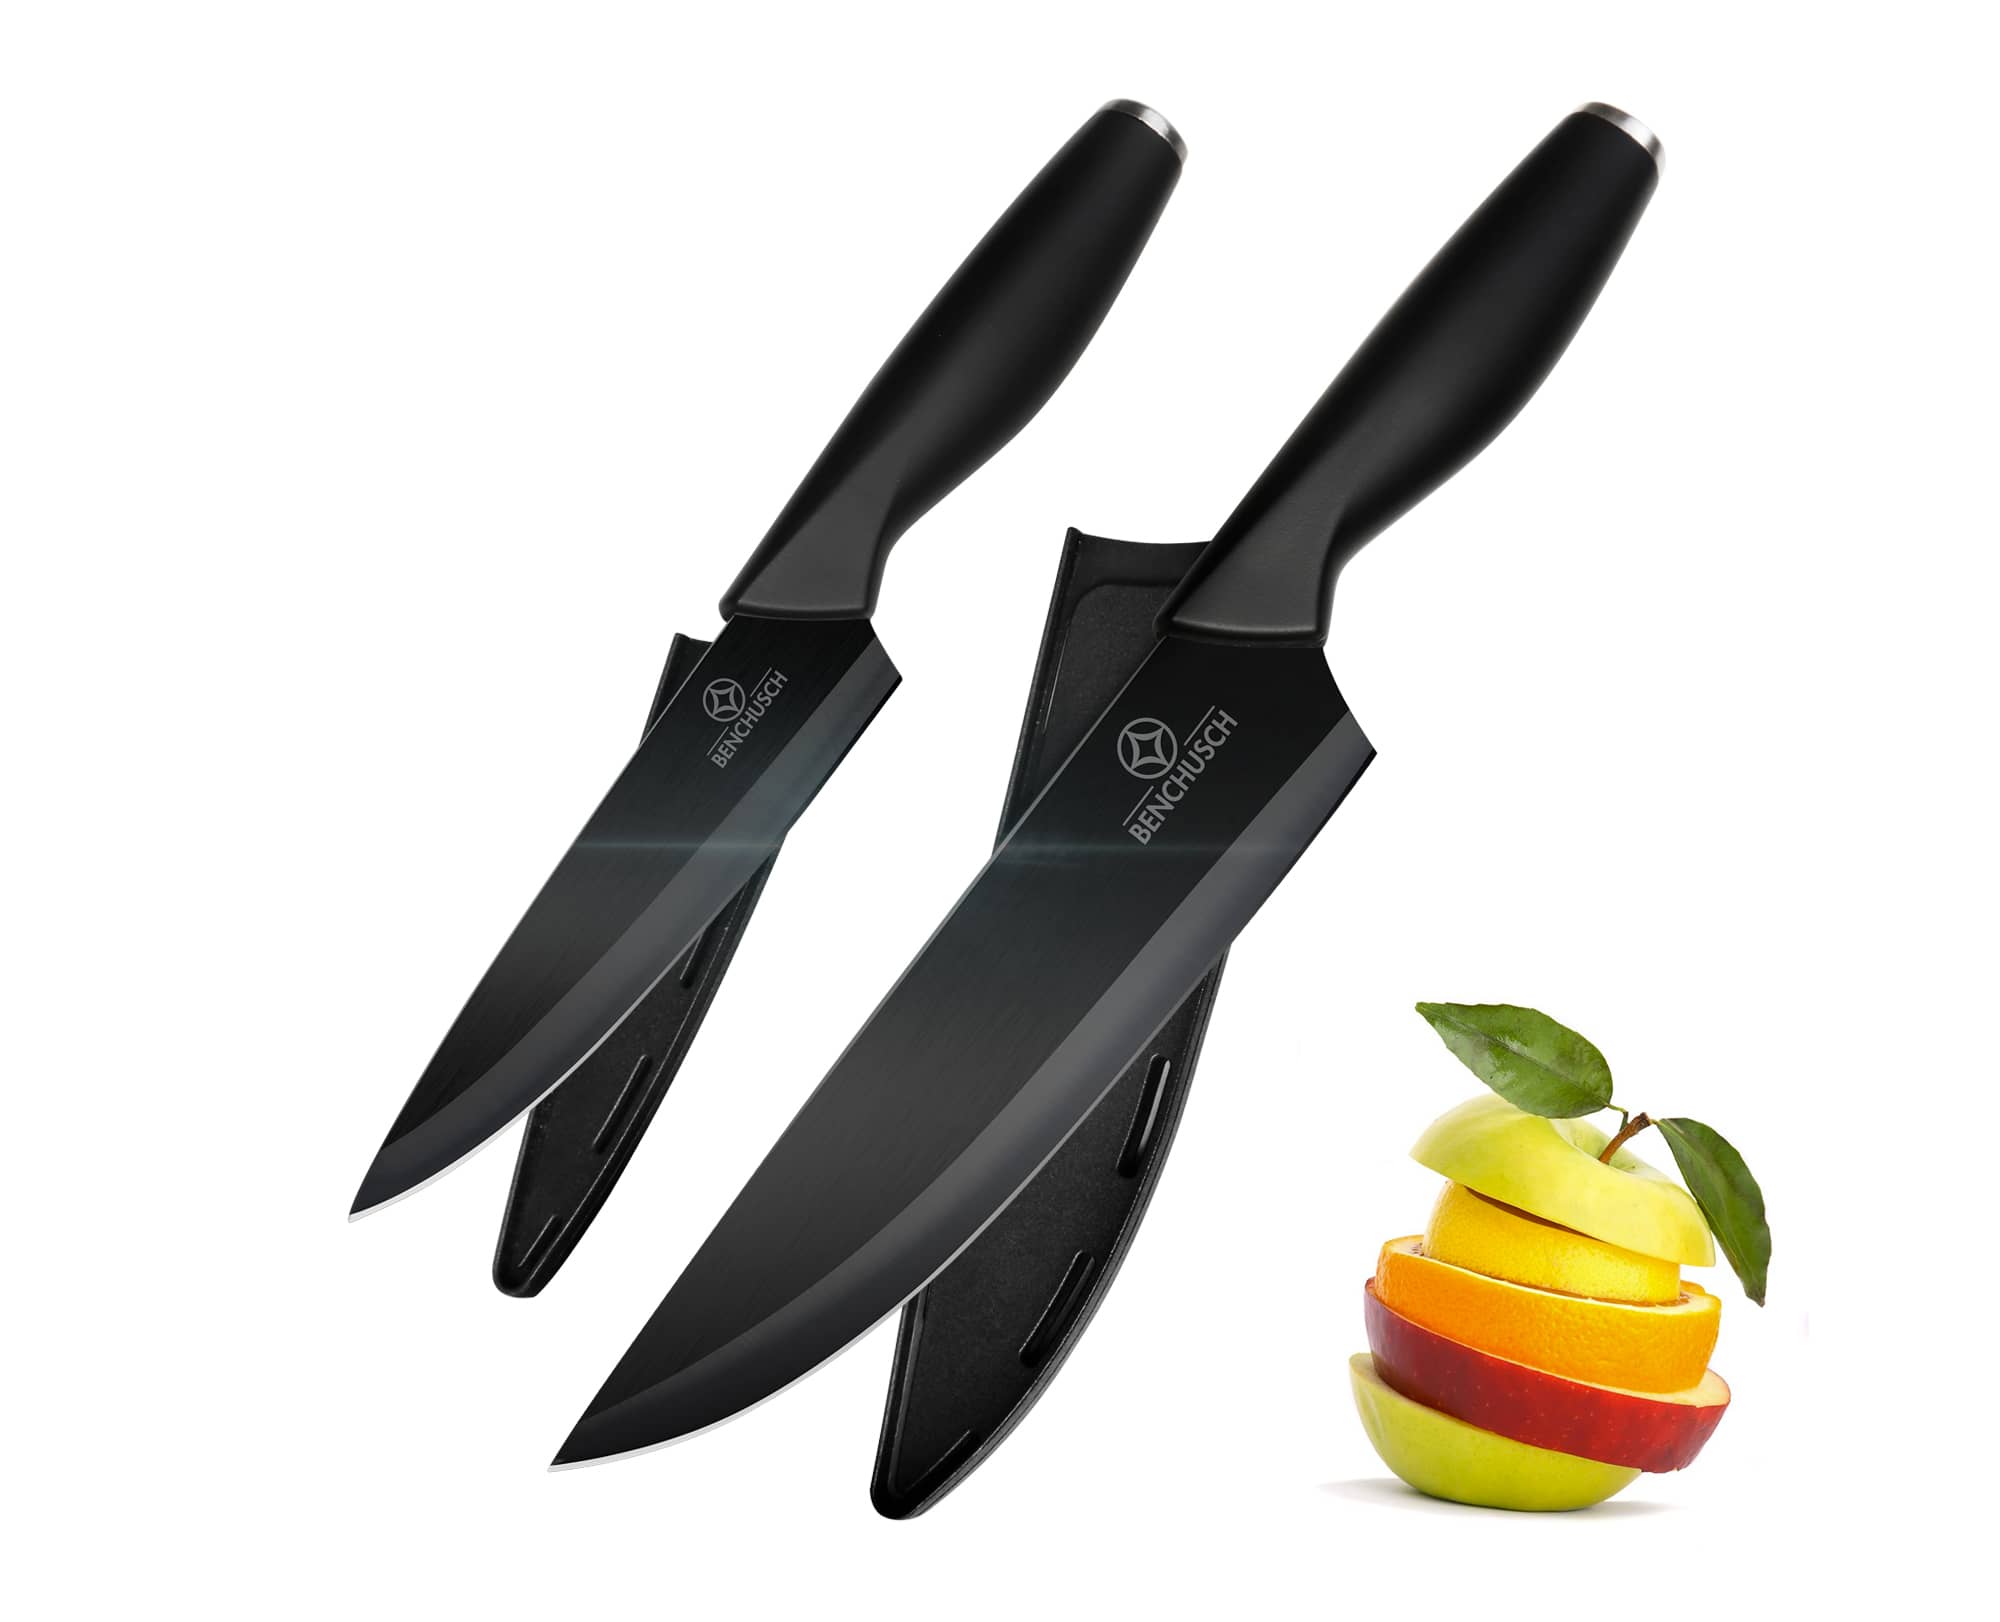 Benchusch Zircornia Series Ceramic Knife 5 inch & 7 inch Set with protective cover